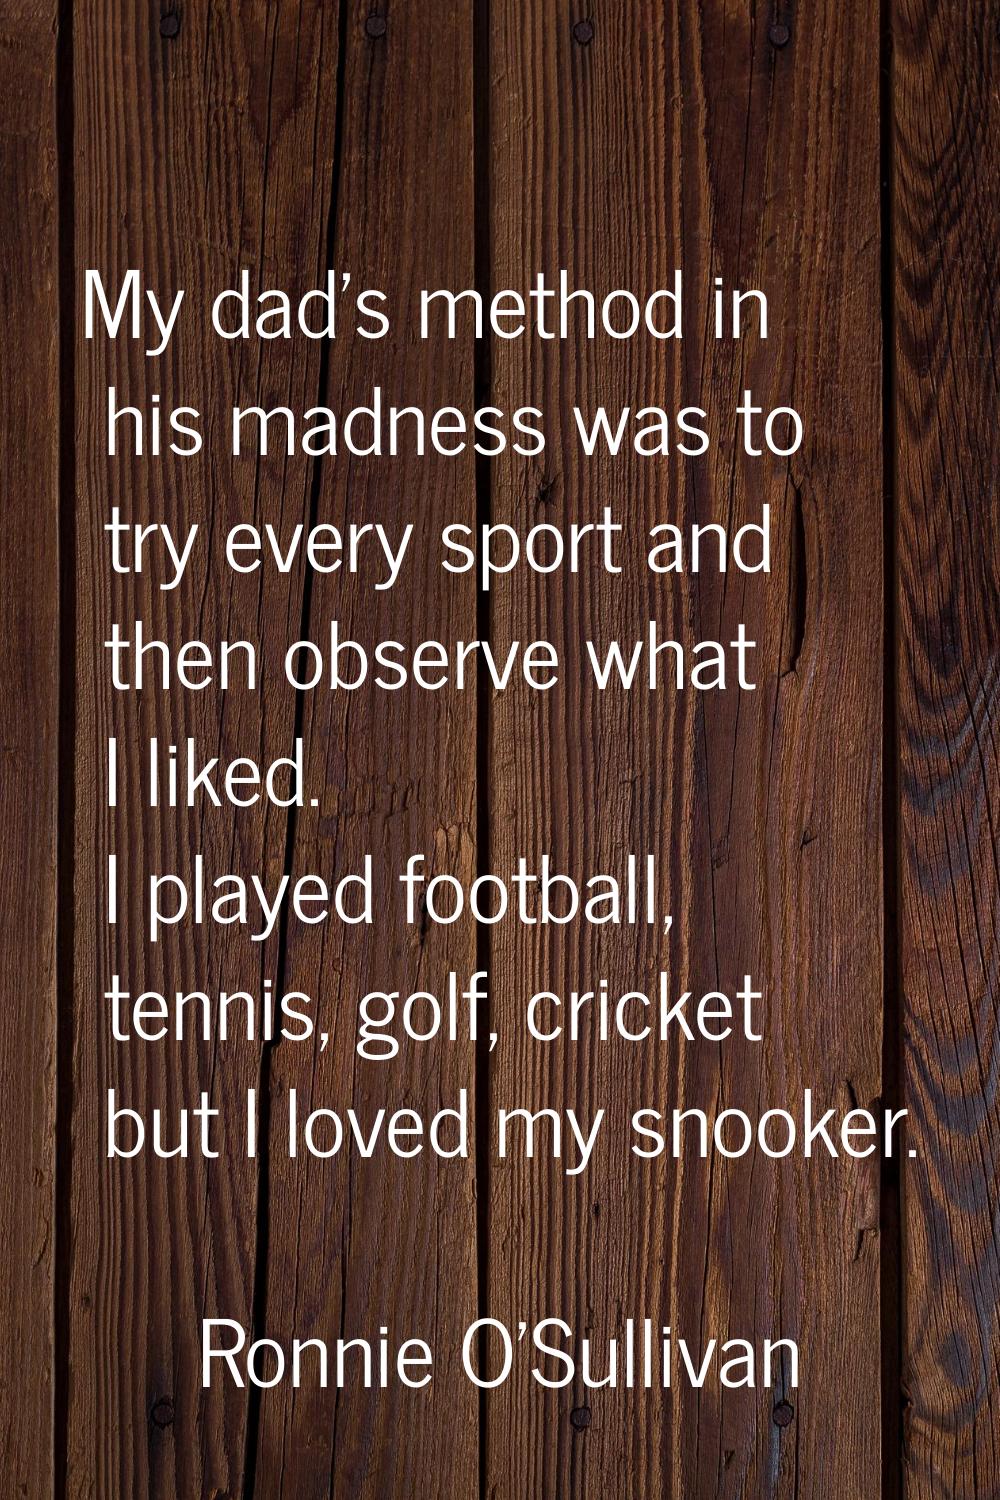 My dad's method in his madness was to try every sport and then observe what I liked. I played footb